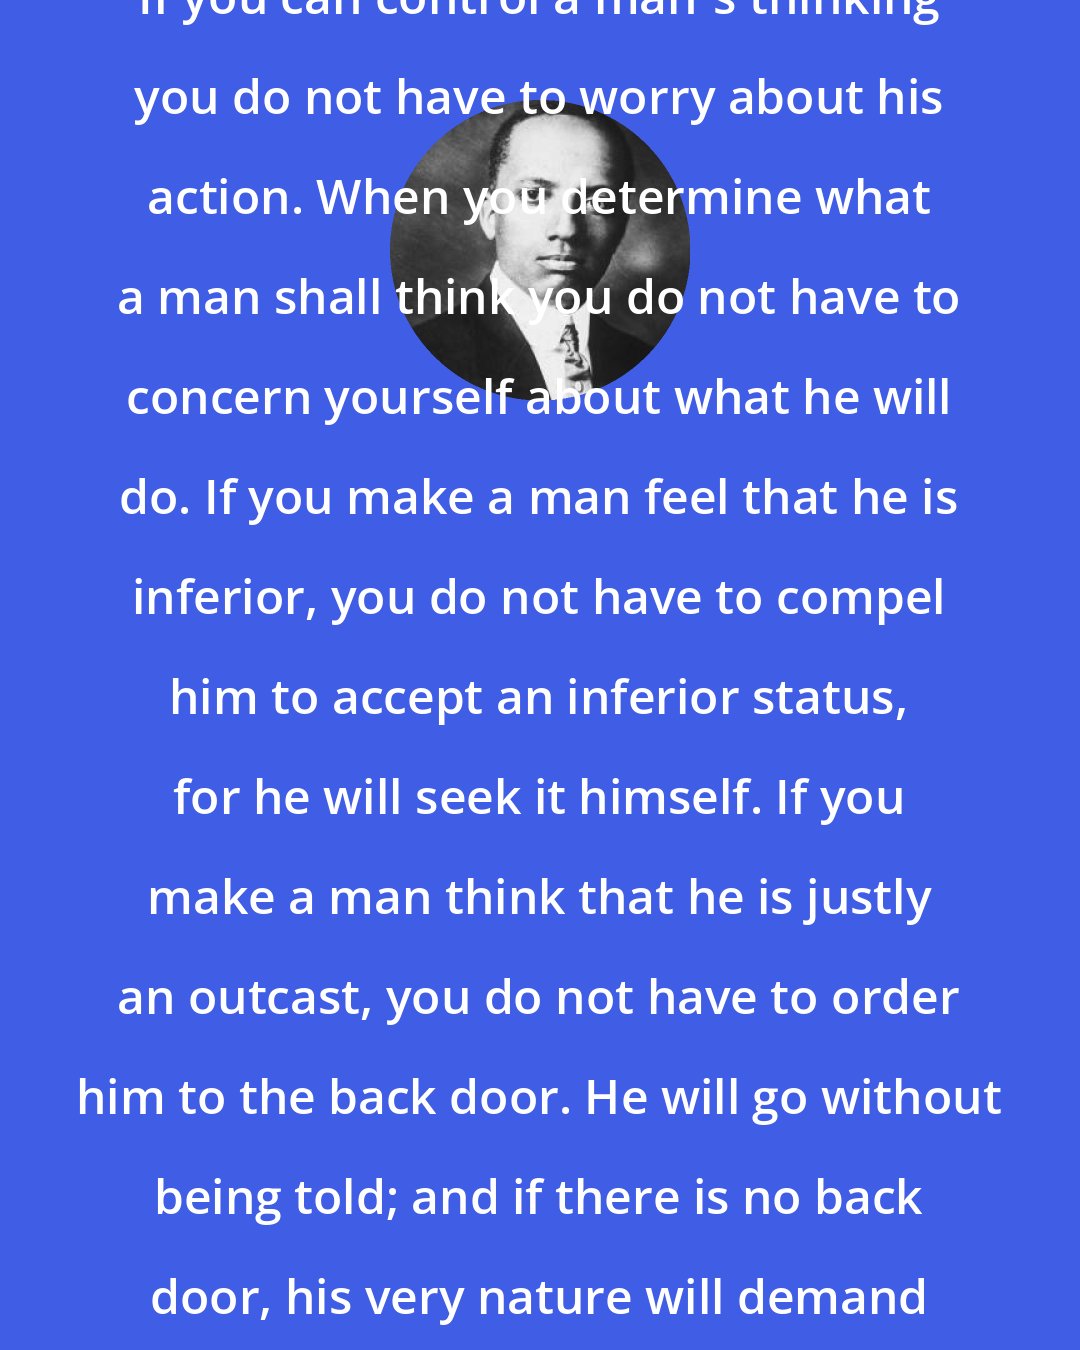 Carter G. Woodson: If you can control a man's thinking you do not have to worry about his action. When you determine what a man shall think you do not have to concern yourself about what he will do. If you make a man feel that he is inferior, you do not have to compel him to accept an inferior status, for he will seek it himself. If you make a man think that he is justly an outcast, you do not have to order him to the back door. He will go without being told; and if there is no back door, his very nature will demand one.